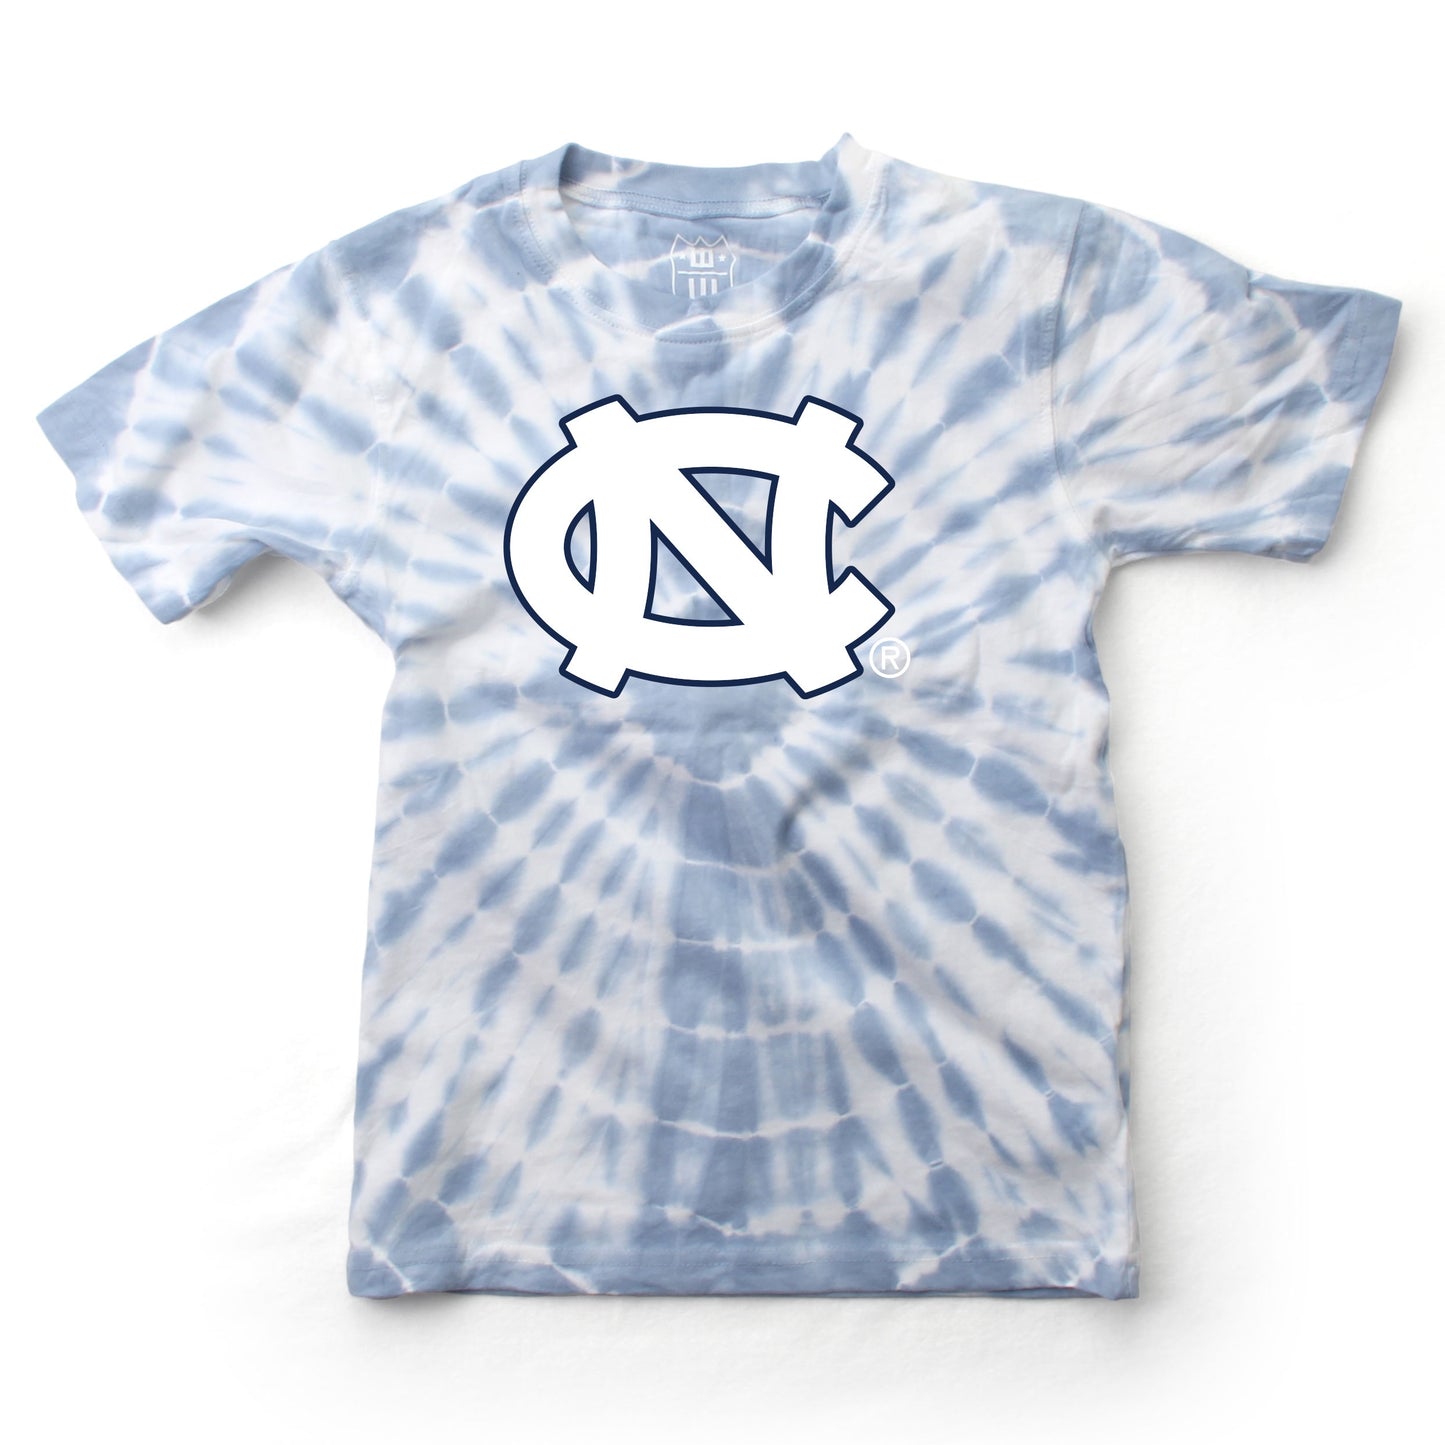 UNC Toddler Tie Dye T-Shirt by Wes and Willy